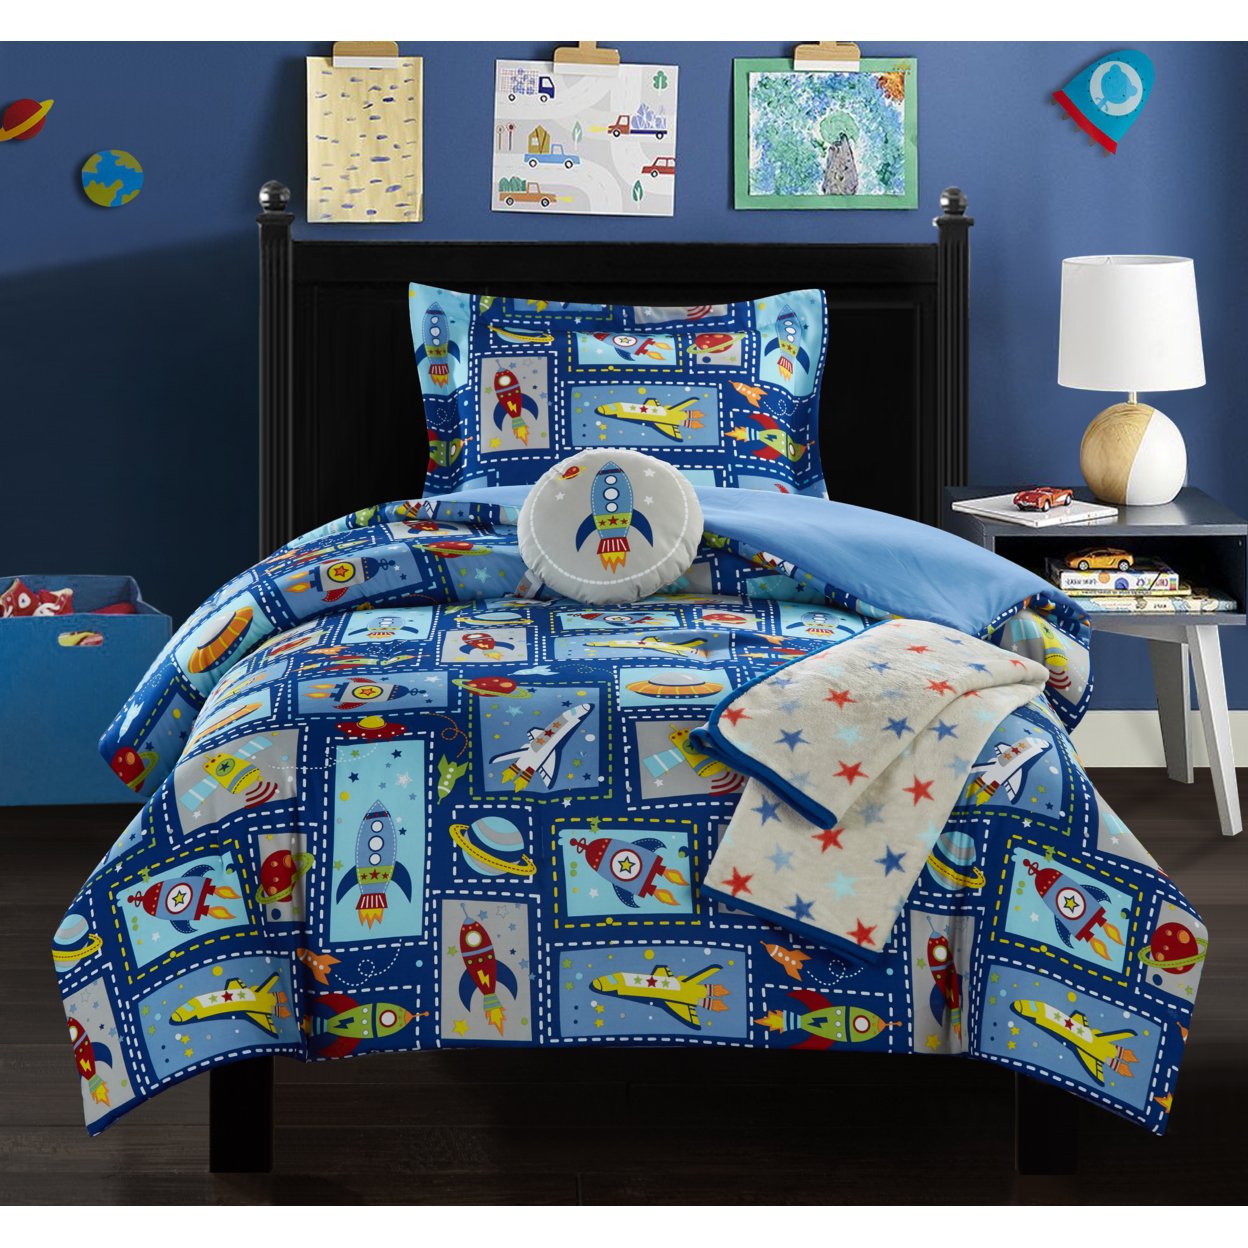 5 Or 4 Piece Comforter Set Youth Design Bedding - Throw Blanket Decorative Pillow Shams Included - Blue, Full